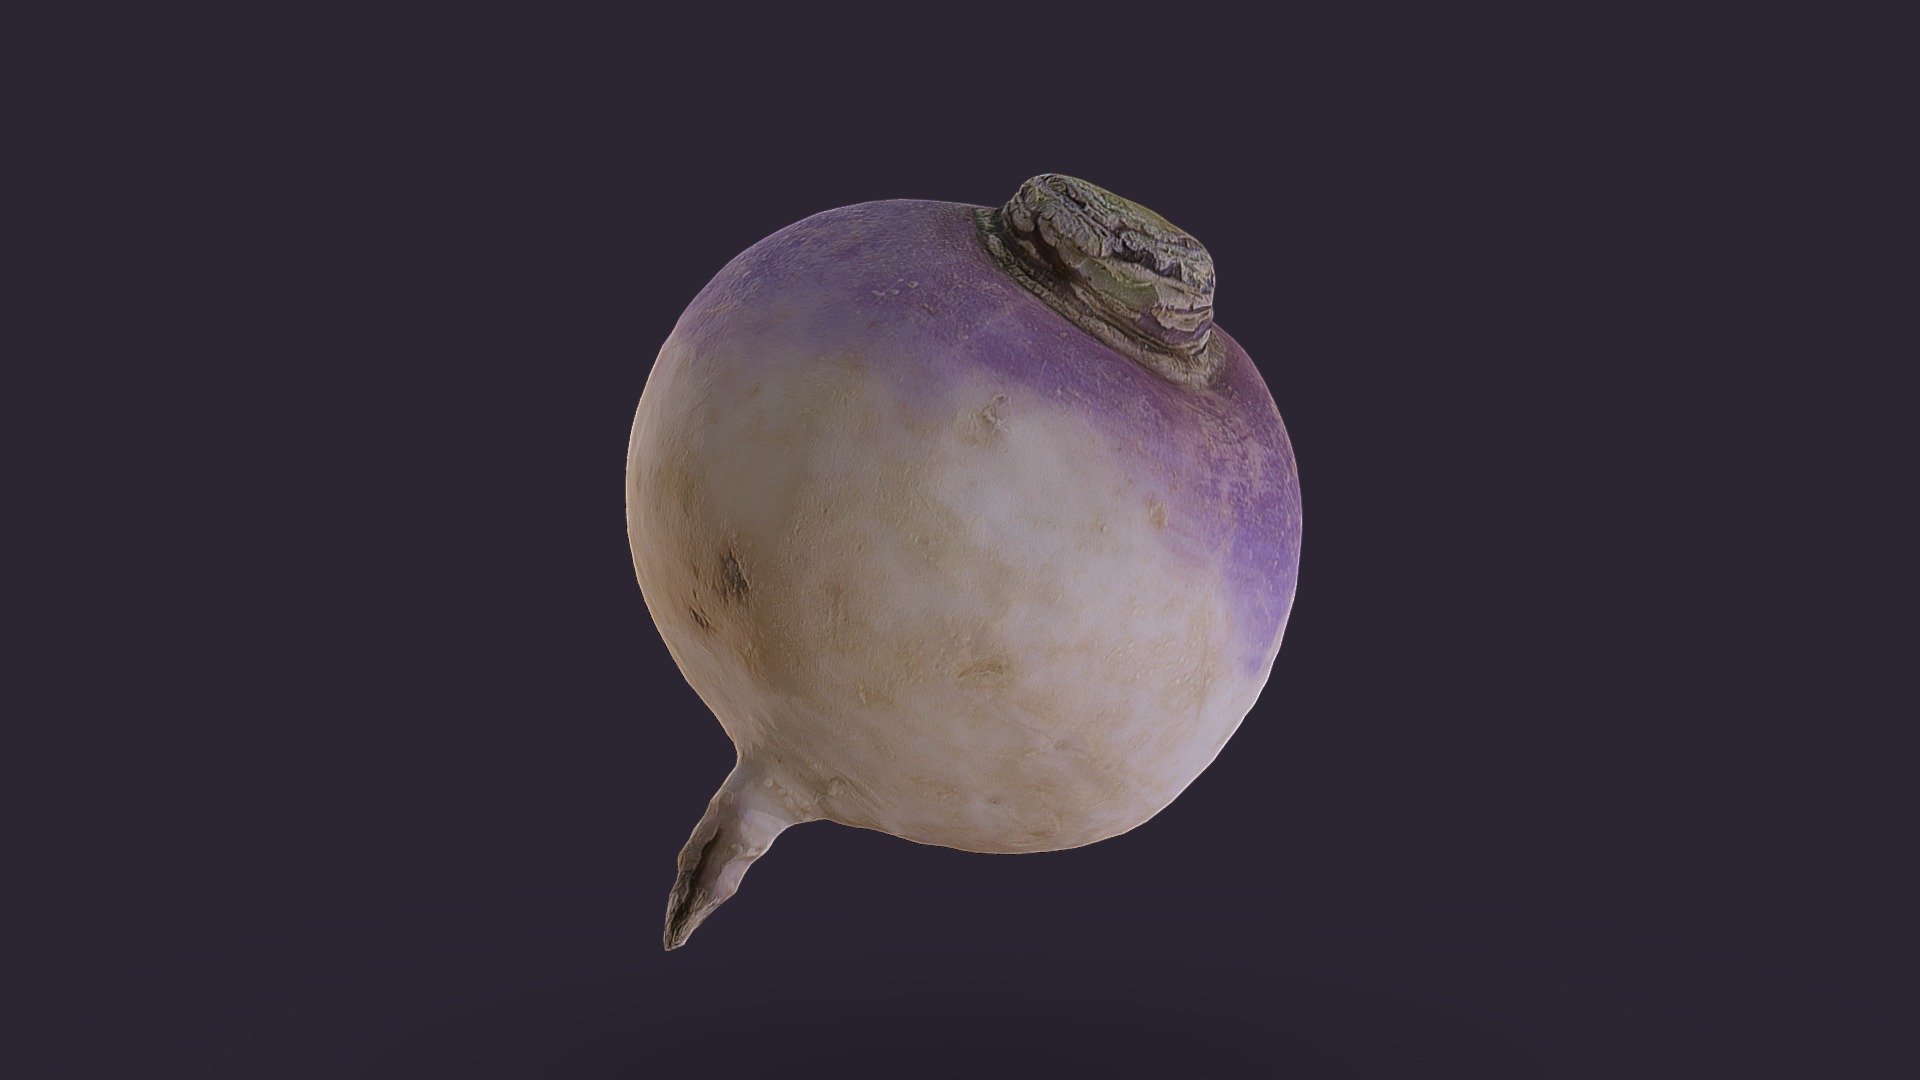 It's a low poly(ish) turnip! 

Scanned for #3dscaqnfruitveg challenge.

More info:
https://blog.sketchfab.com/monthly-3d-scanning-challenge-horn-plenty/

&ldquo;The turnip or white turnip (Brassica rapa subsp. rapa) is a root vegetable commonly grown in temperate climates worldwide for its white, bulbous taproot.

Small, tender varieties are grown for human consumption, while larger varieties are grown as feed for livestock.

In the north of England and Scotland, and eastern Canada (Newfoundland), turnip (or neep; the word turnip is an old compound of tur- as in turned/rounded on a lathe and neep, derived from Latin napus) often refers to the larger, yellow rutabaga root vegetable, also known as the &ldquo;swede